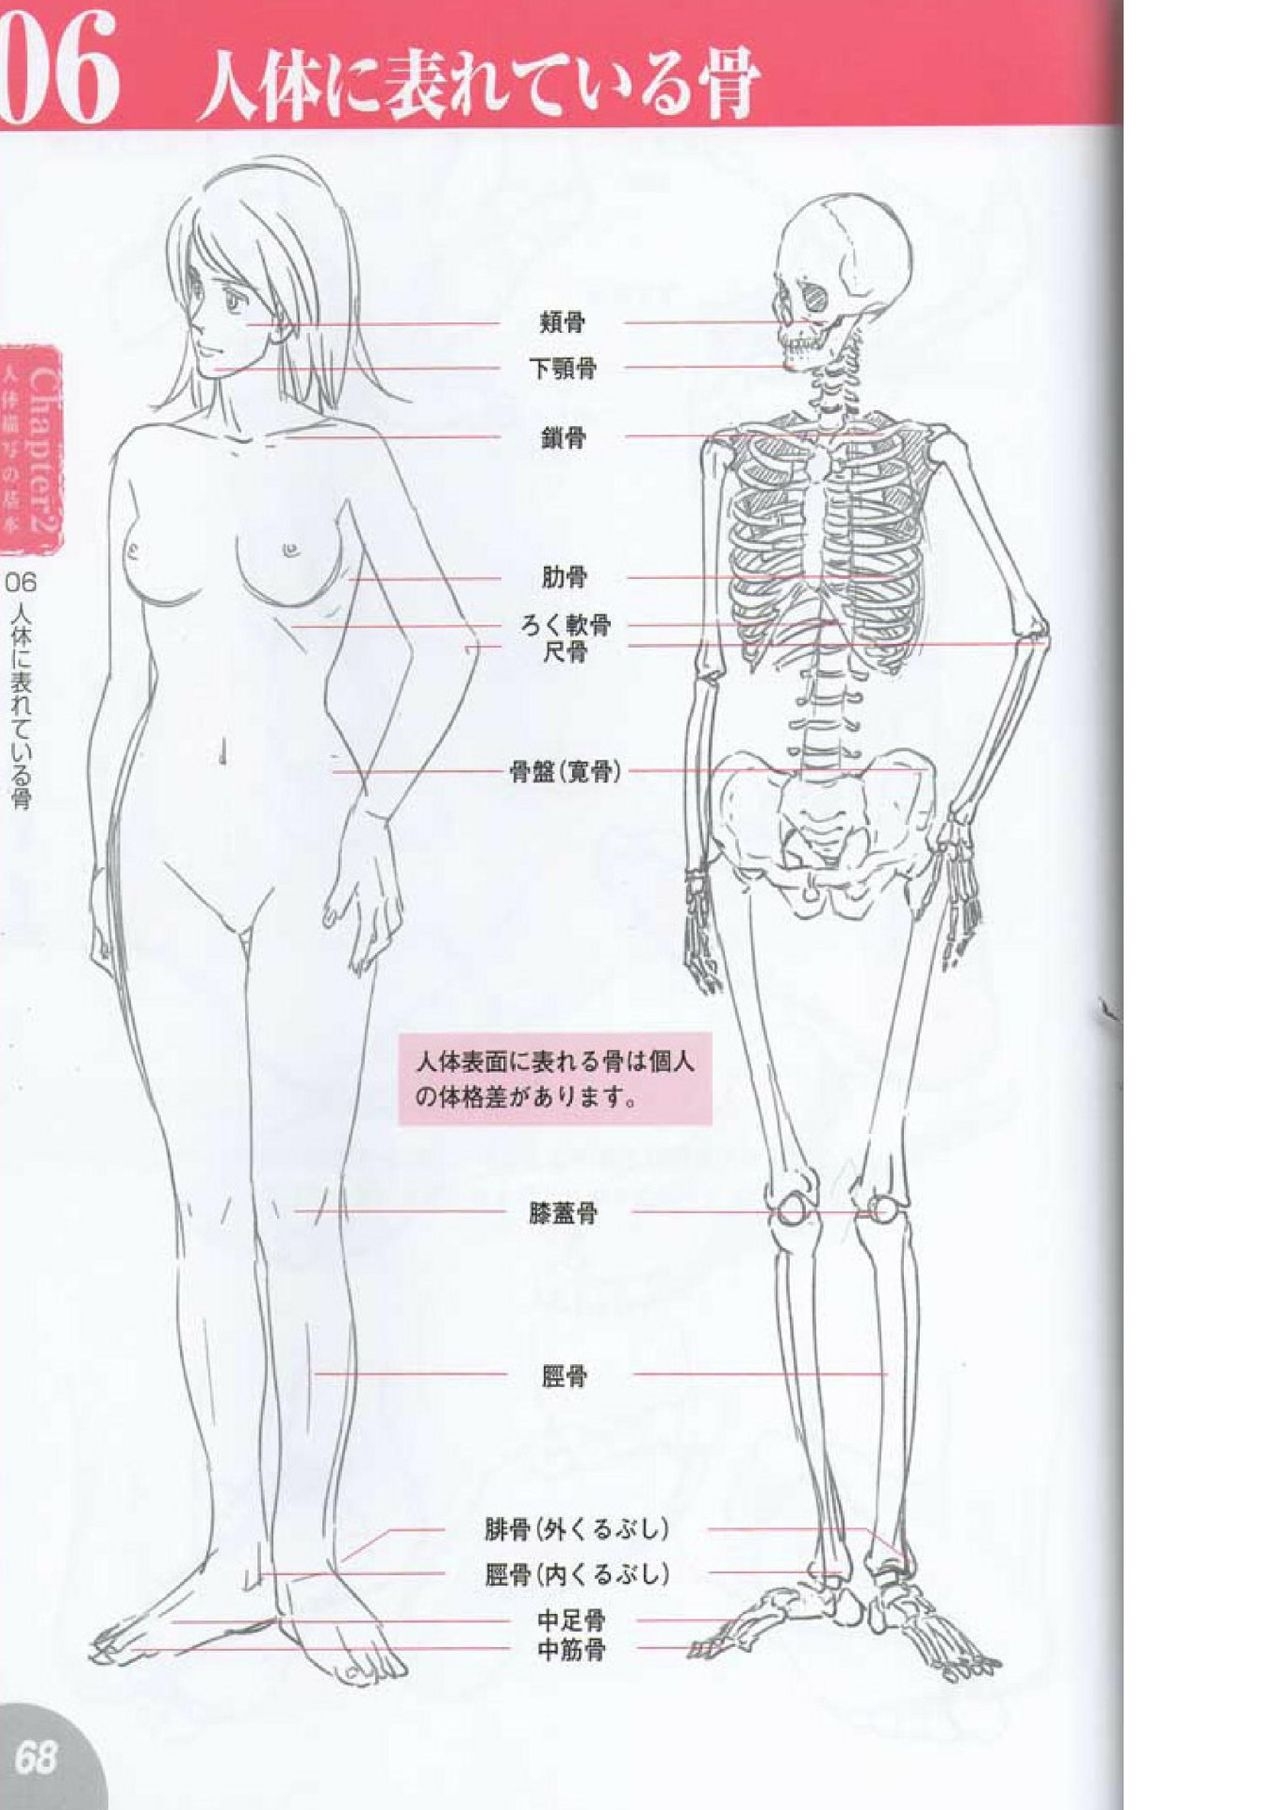 How to draw a character drawing from a human anatomical chart 66